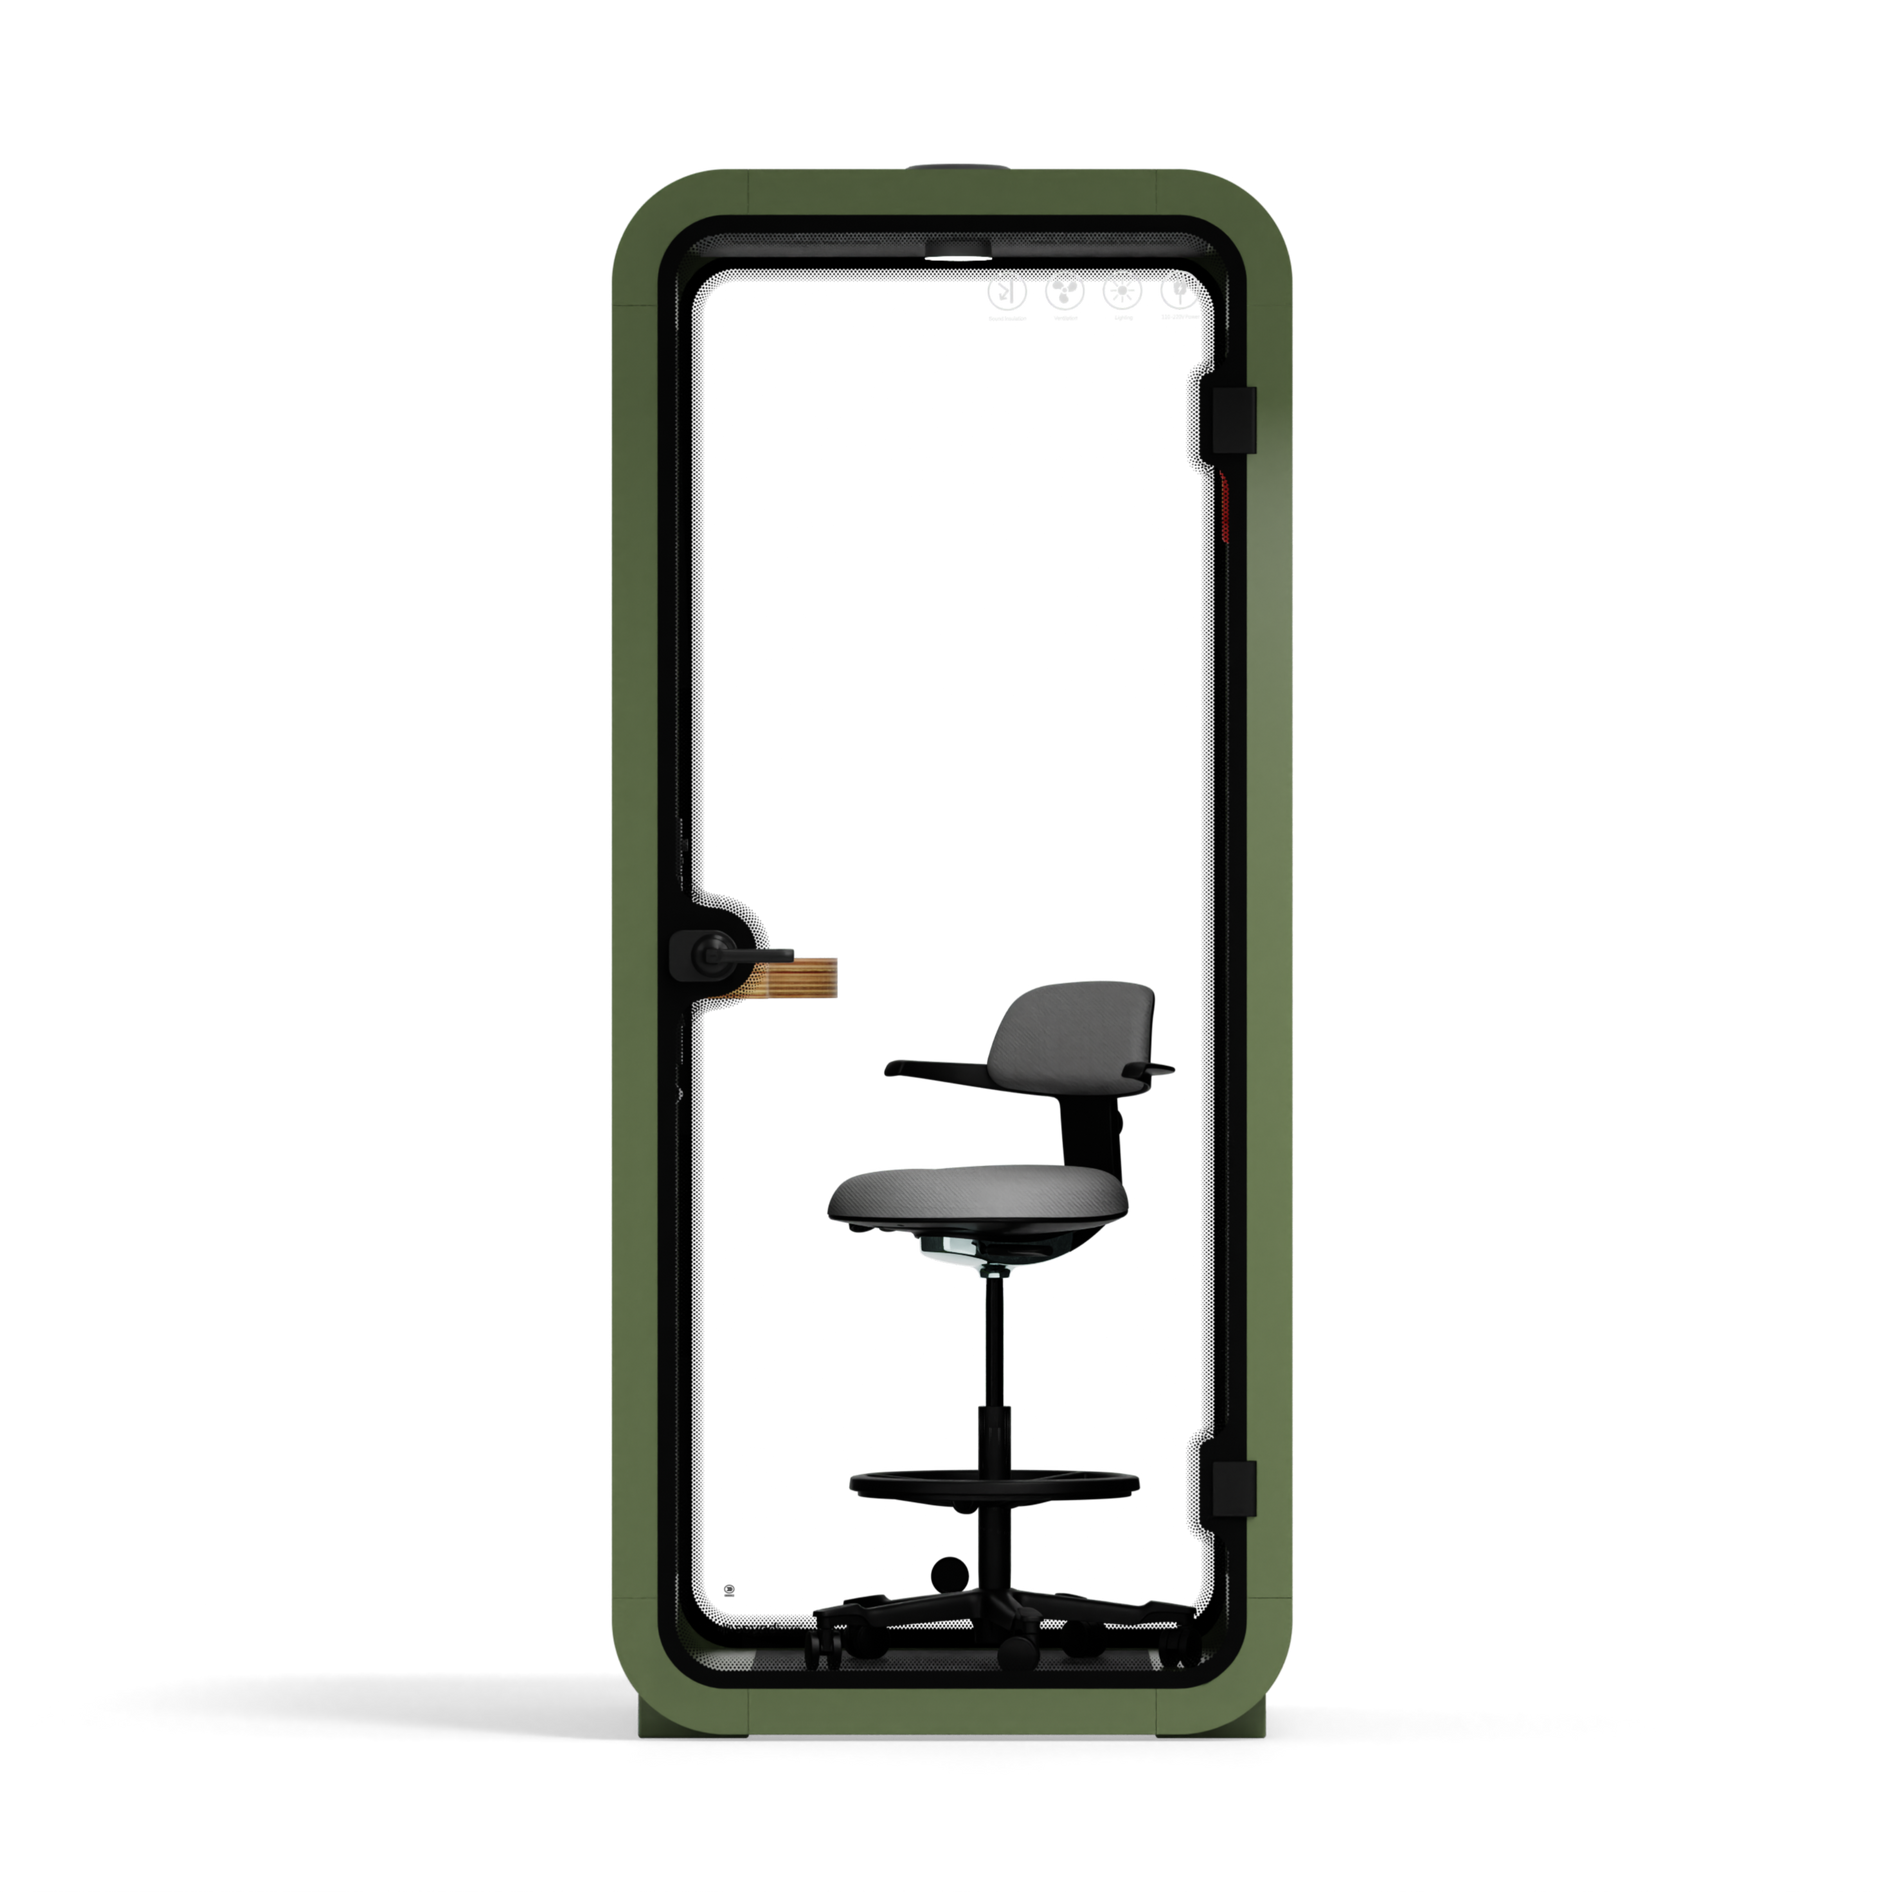 Office Pod Quell AcousticGreen / Dark Grey / With Furniture